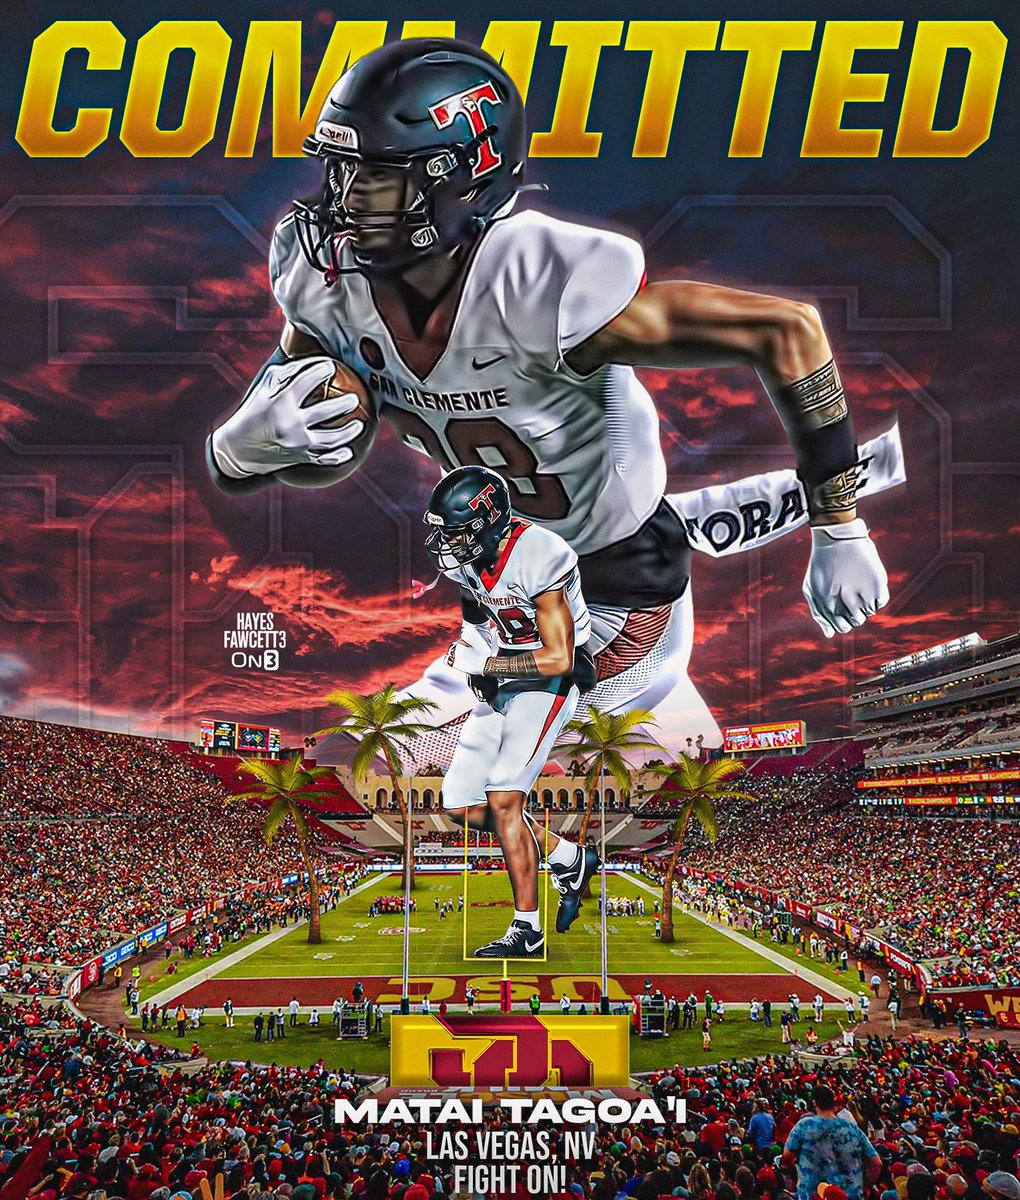 BREAKING: Four-Star LB Matai Tagoa’i has Committed to USC, he tells me for @on3recruits The 6’4 210 LB from Las Vegas, NV chose the Trojans over Texas, Oklahoma, & Washington “I’m all in, let’s get this money. ALL GLORY ✌🏽 GOD. FightOn! Proverbs 3:5-6” on3.com/db/matai-tagoa…